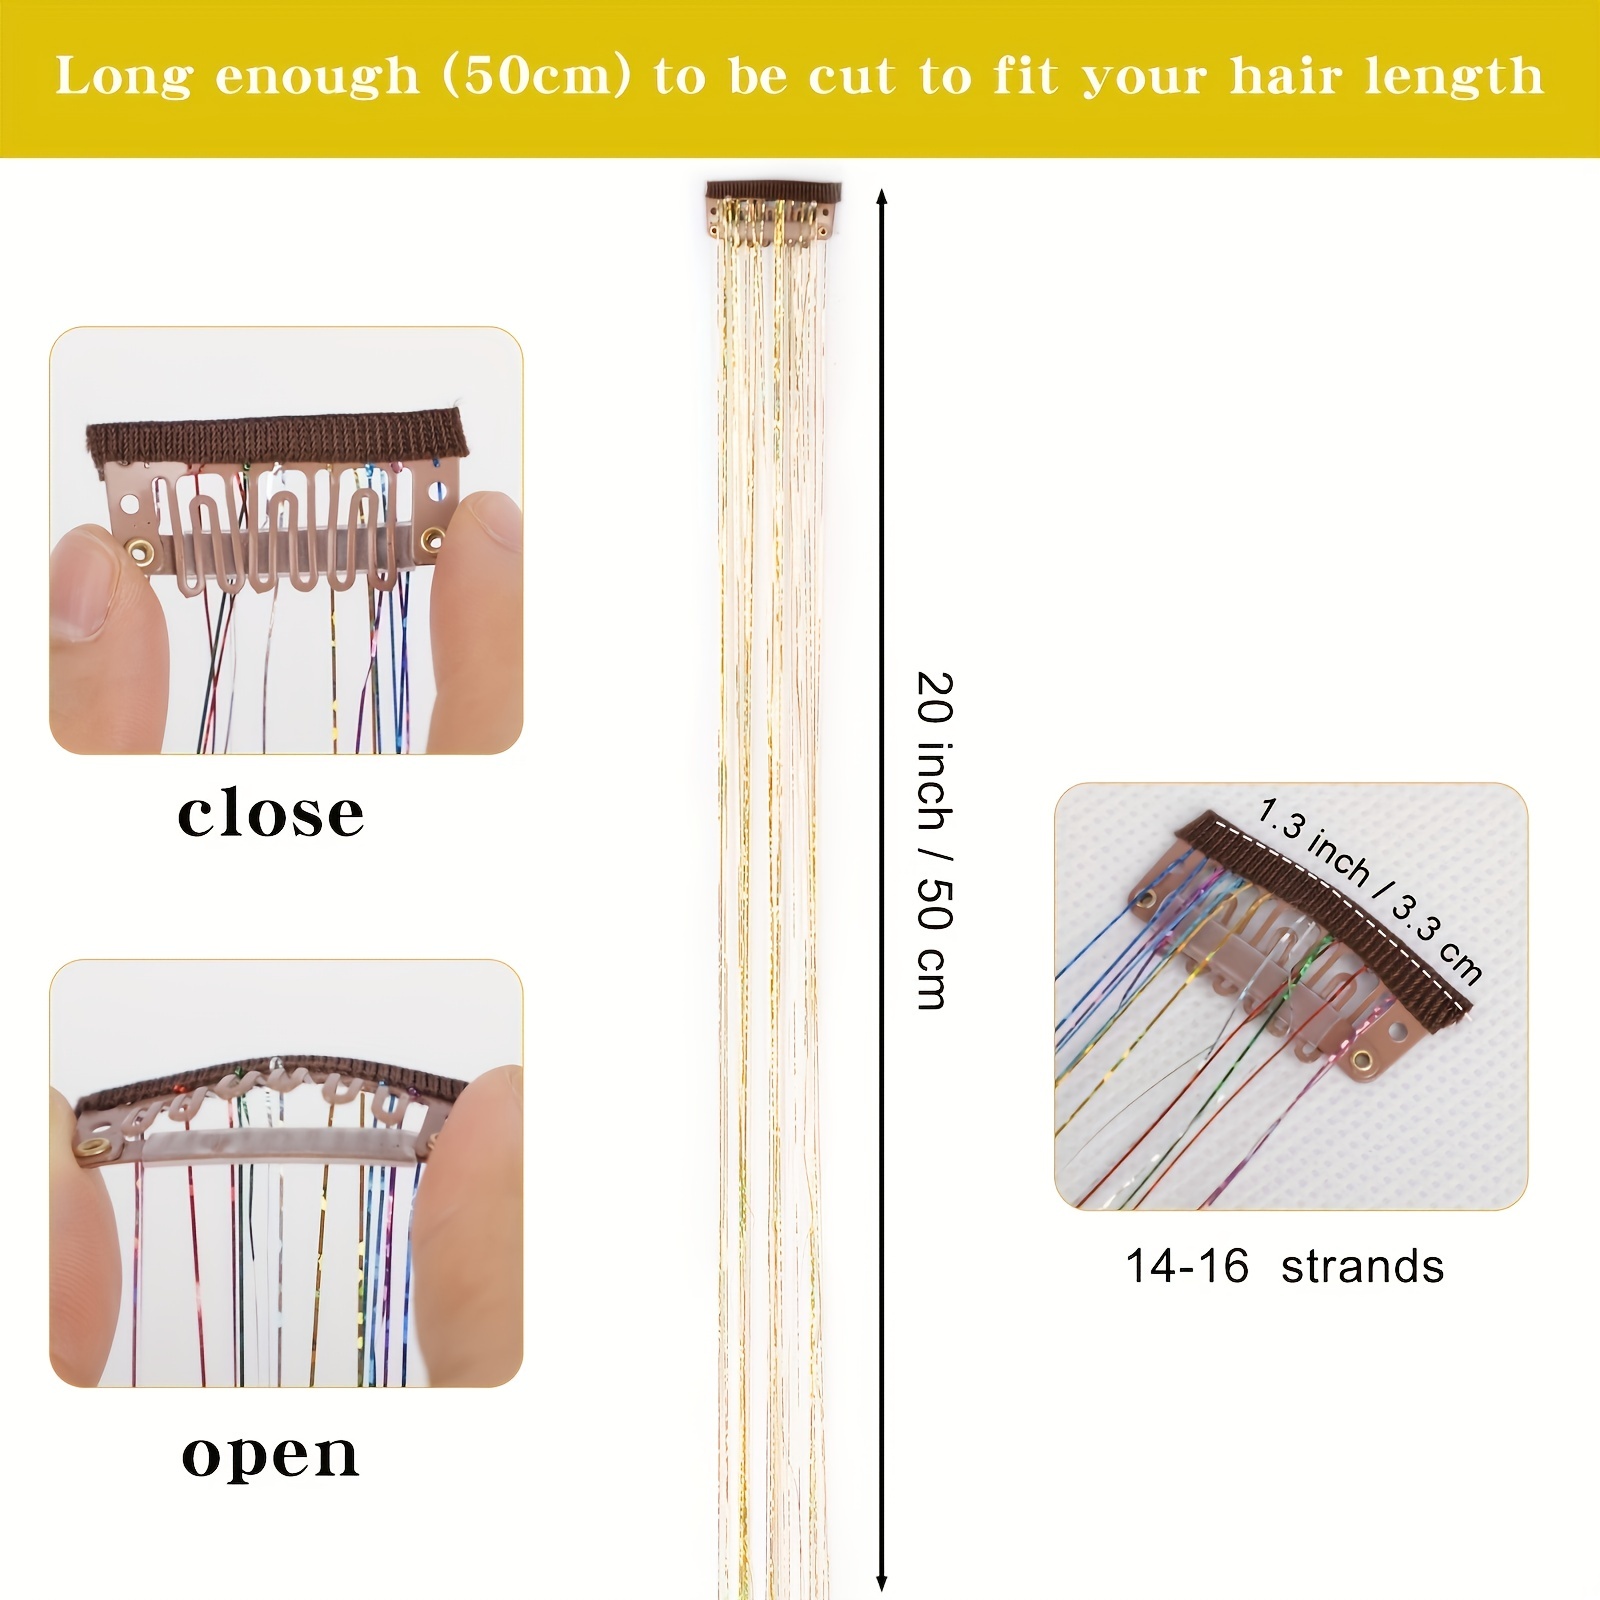 12pcs Clip in Hair Tinsel Kit 20 inch Heat Resistant Fairy Hair Tinsel Kit Glitter Hair Tensile Clip in on Sparkling Shiny Colorful Hair